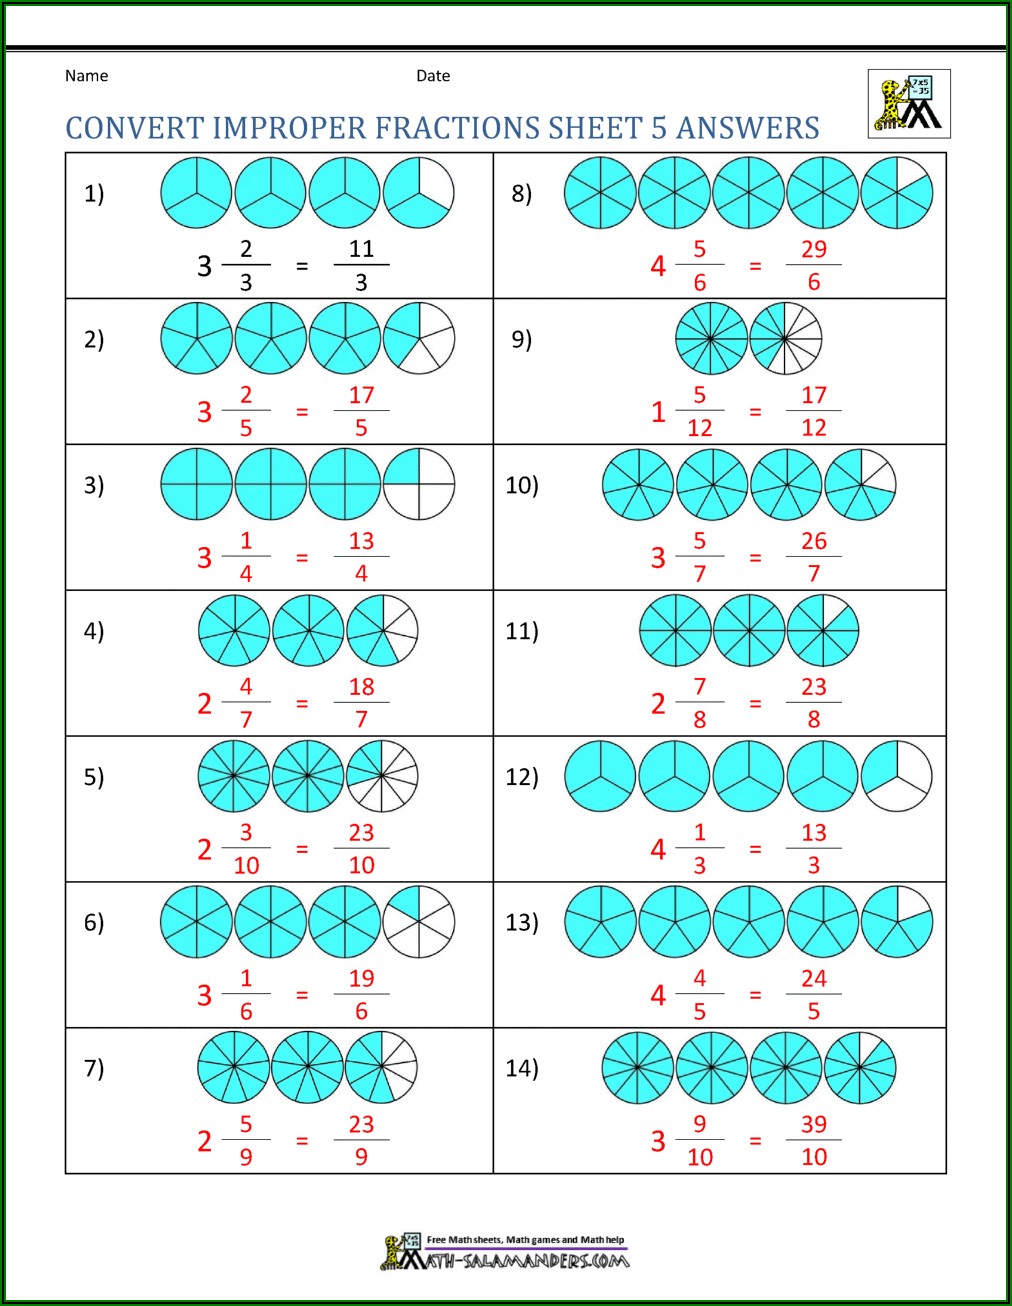 Converting Improper Fractions To Mixed Numbers Worksheet 4th Grade